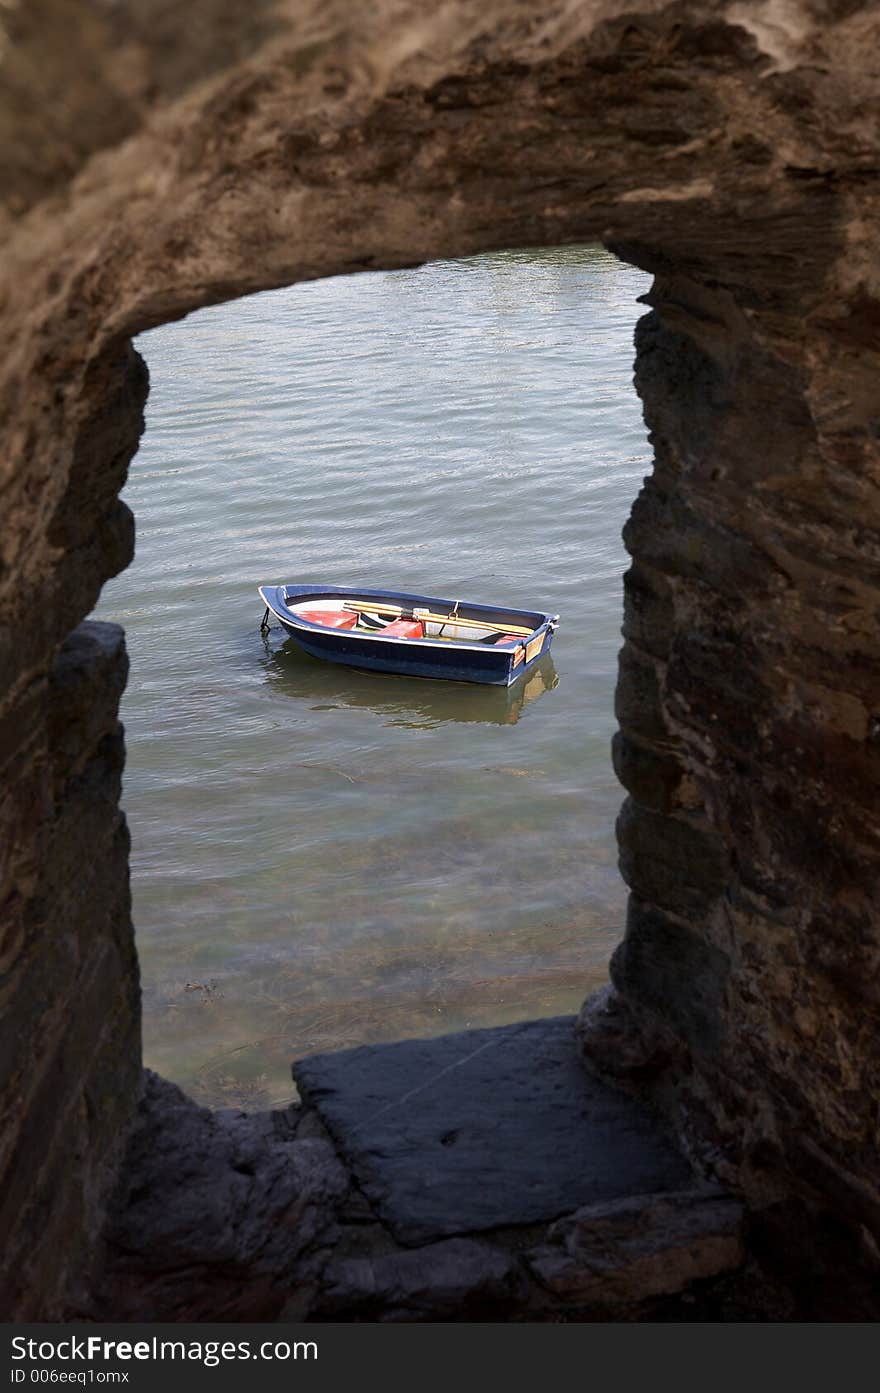 View of a small wooden row boat on the river dart looking through a stone walls window of bayards cove fort dartmouth devon england europe uk taken in july 2006